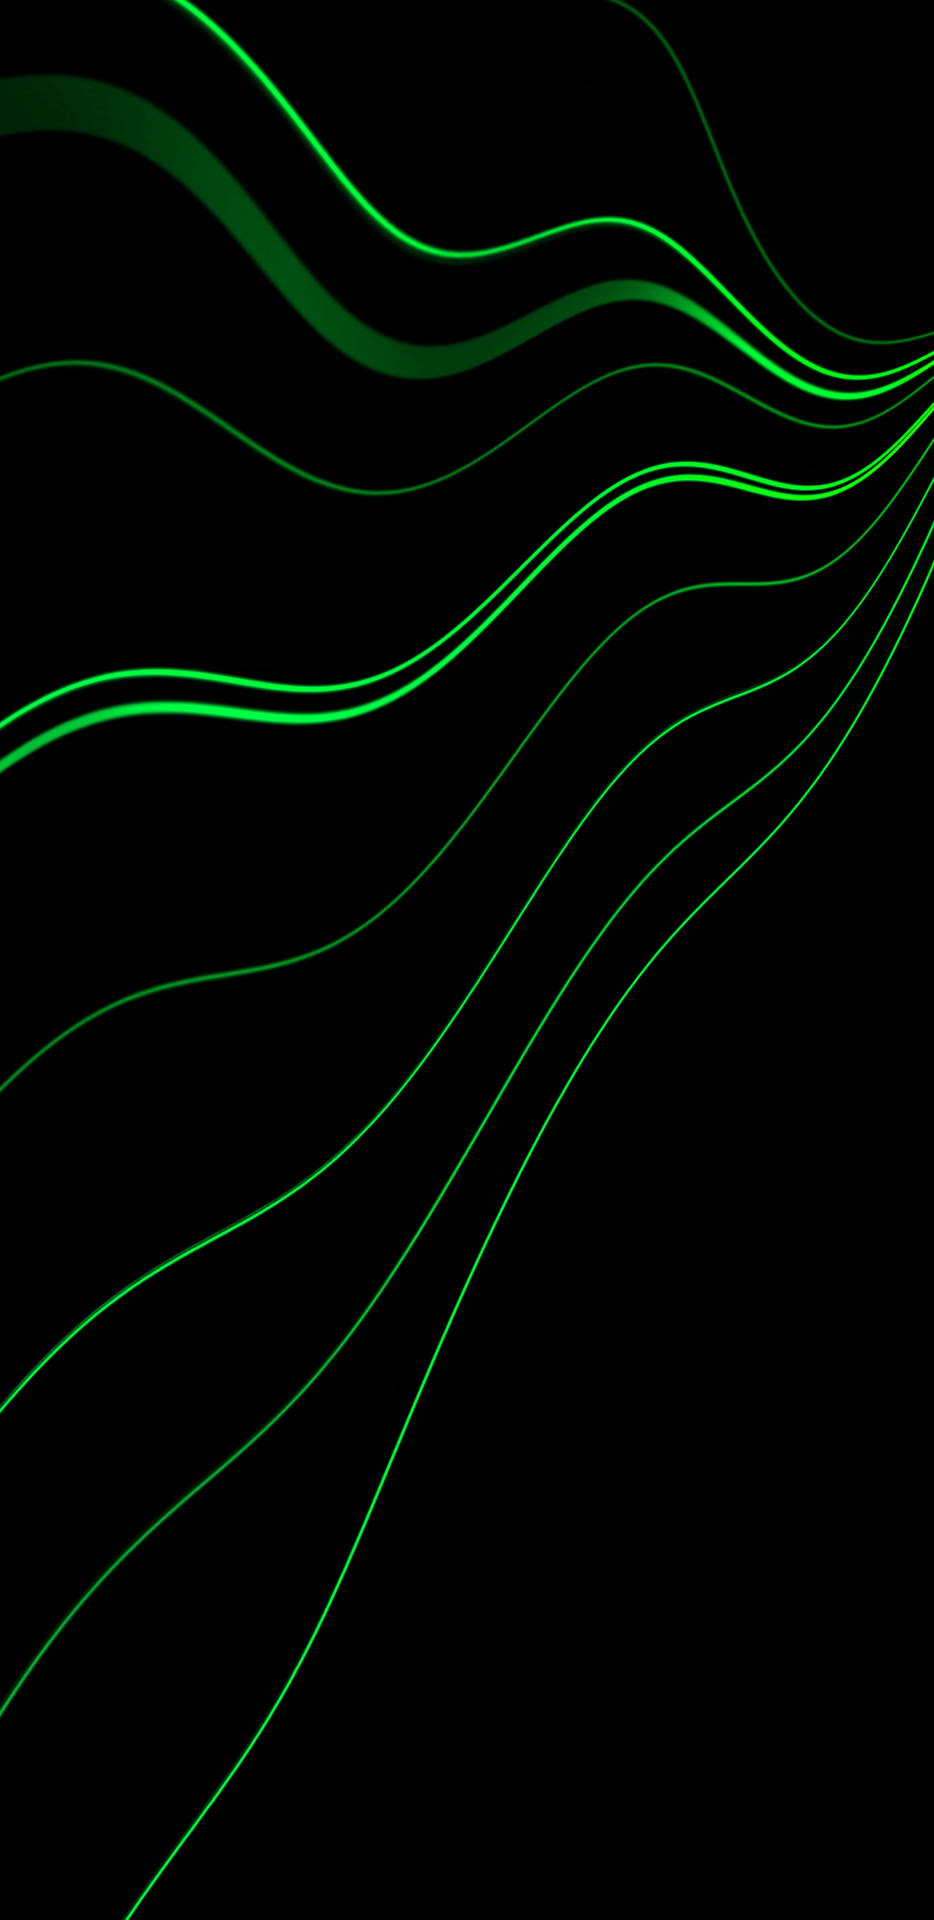 Black And Green Wavy Lines Background